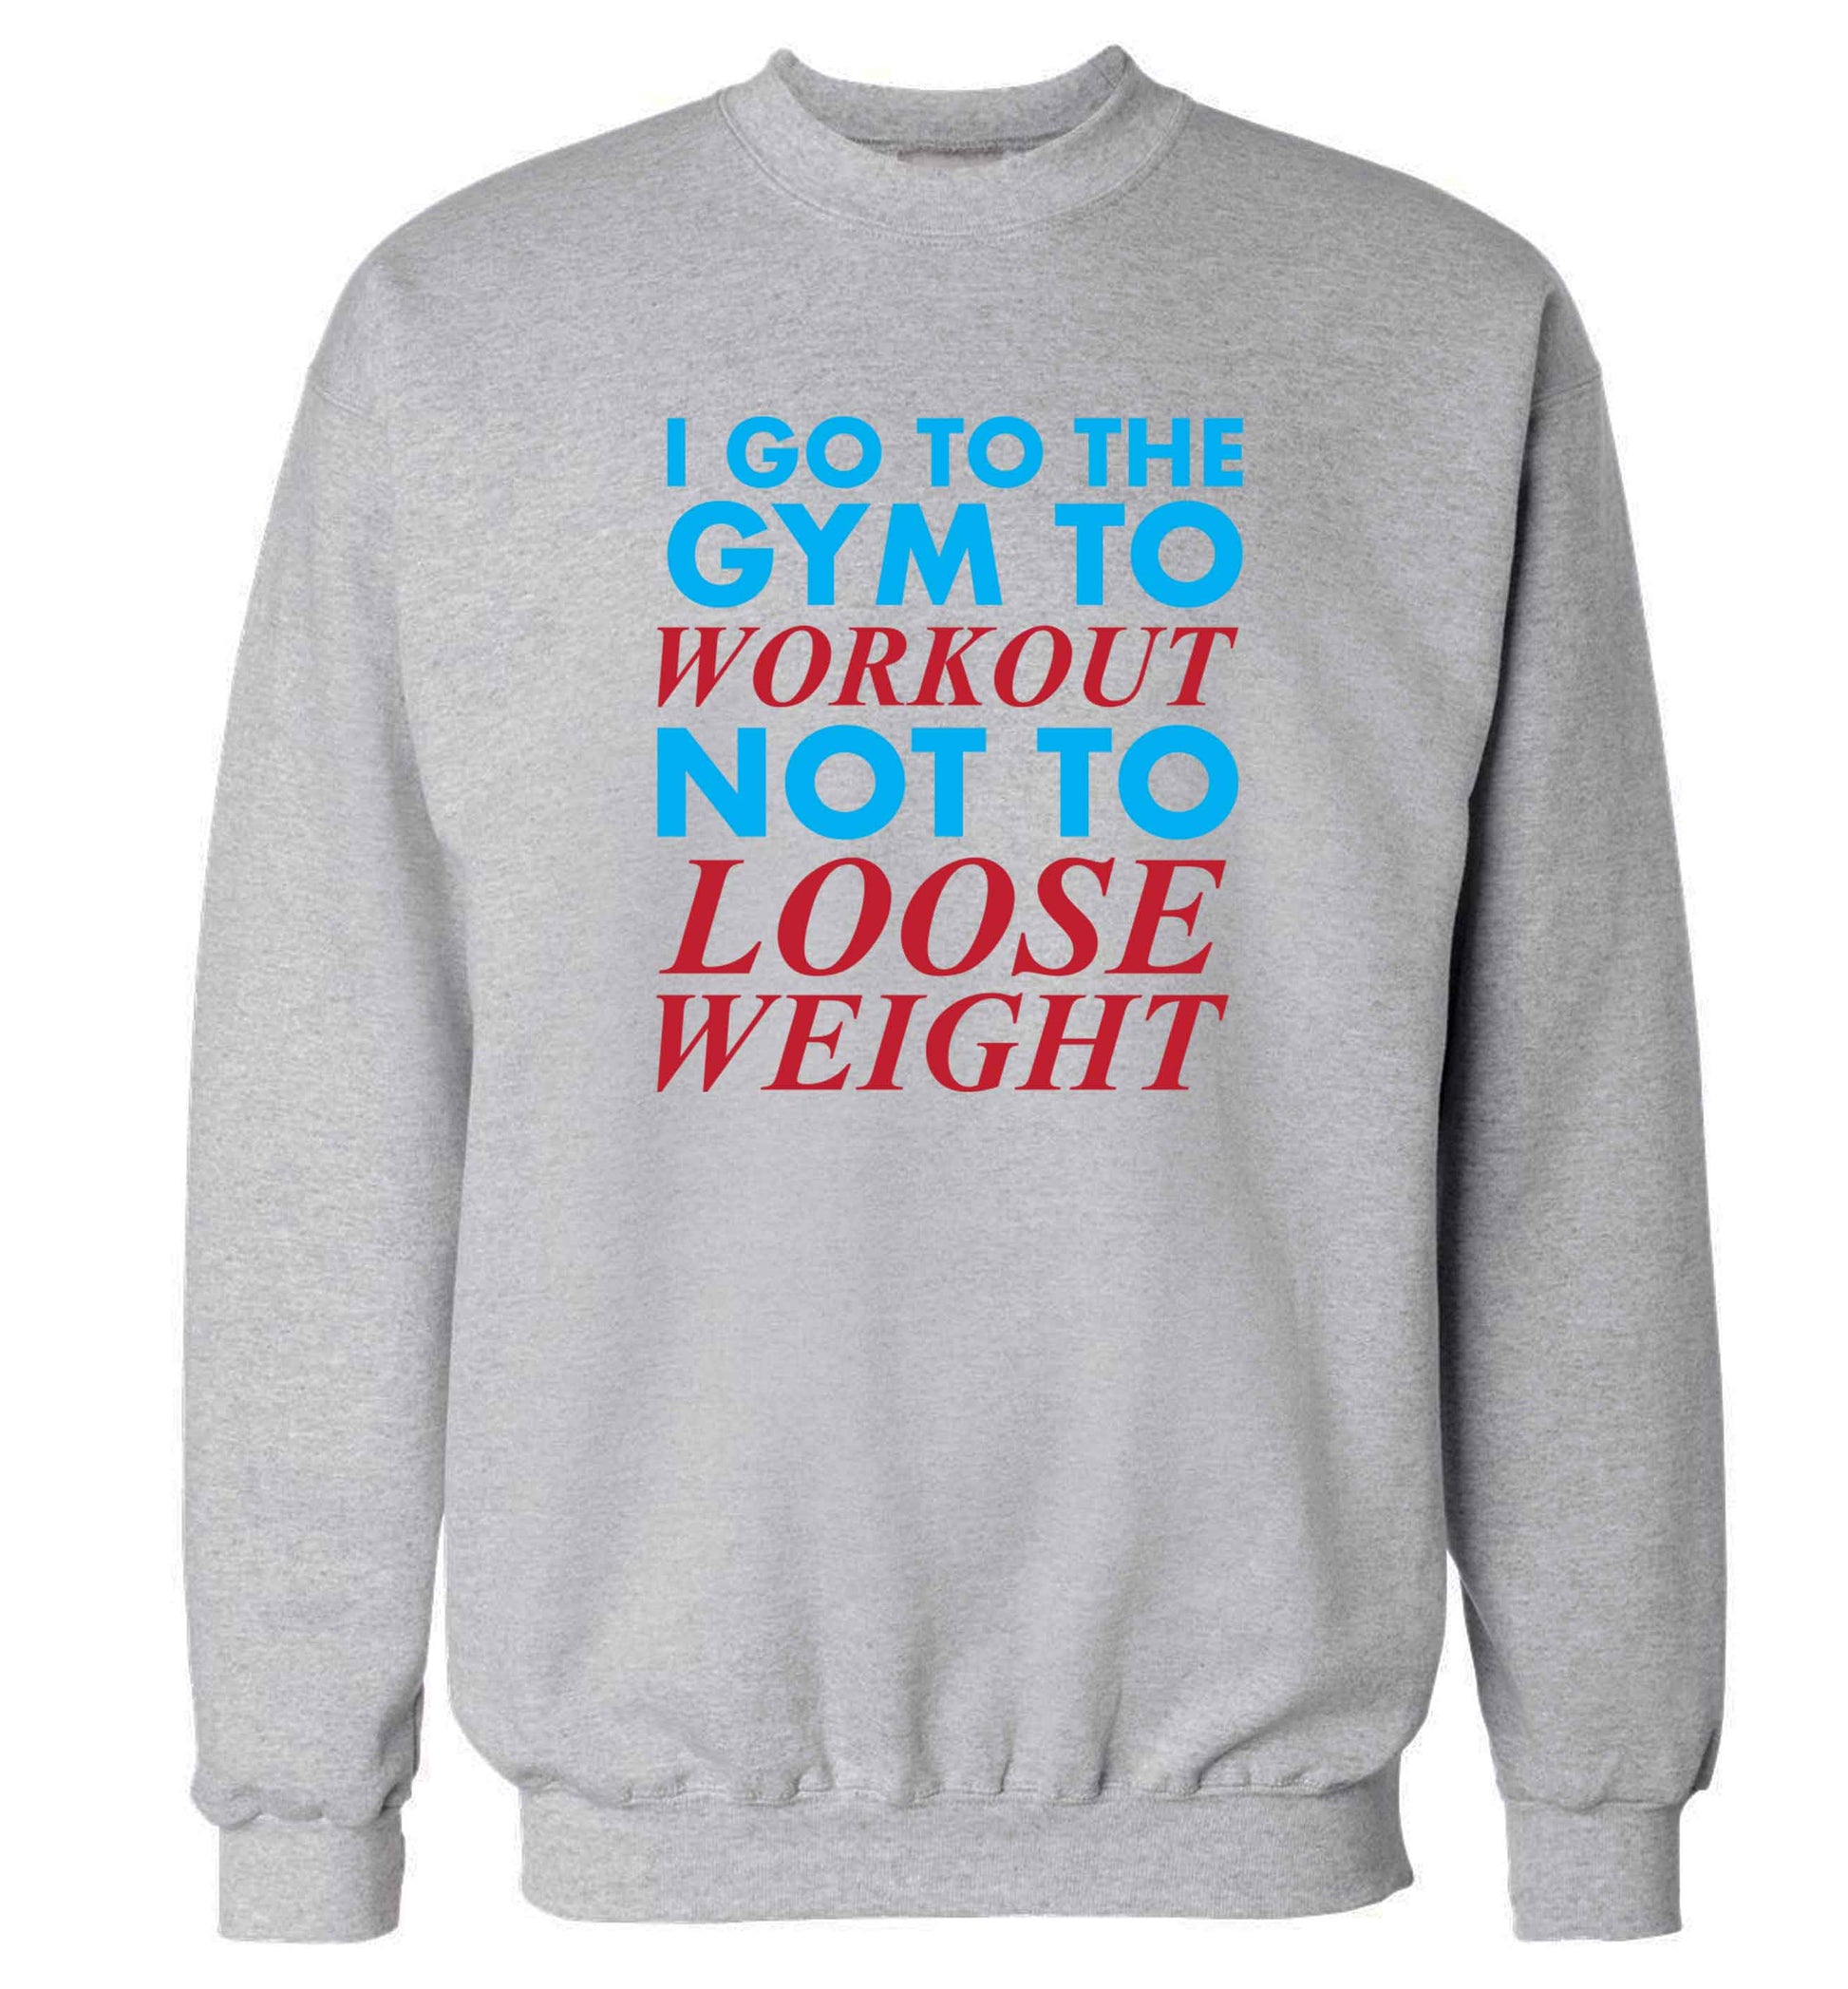 I go to the gym to workout not to loose weight adult's unisex grey sweater 2XL